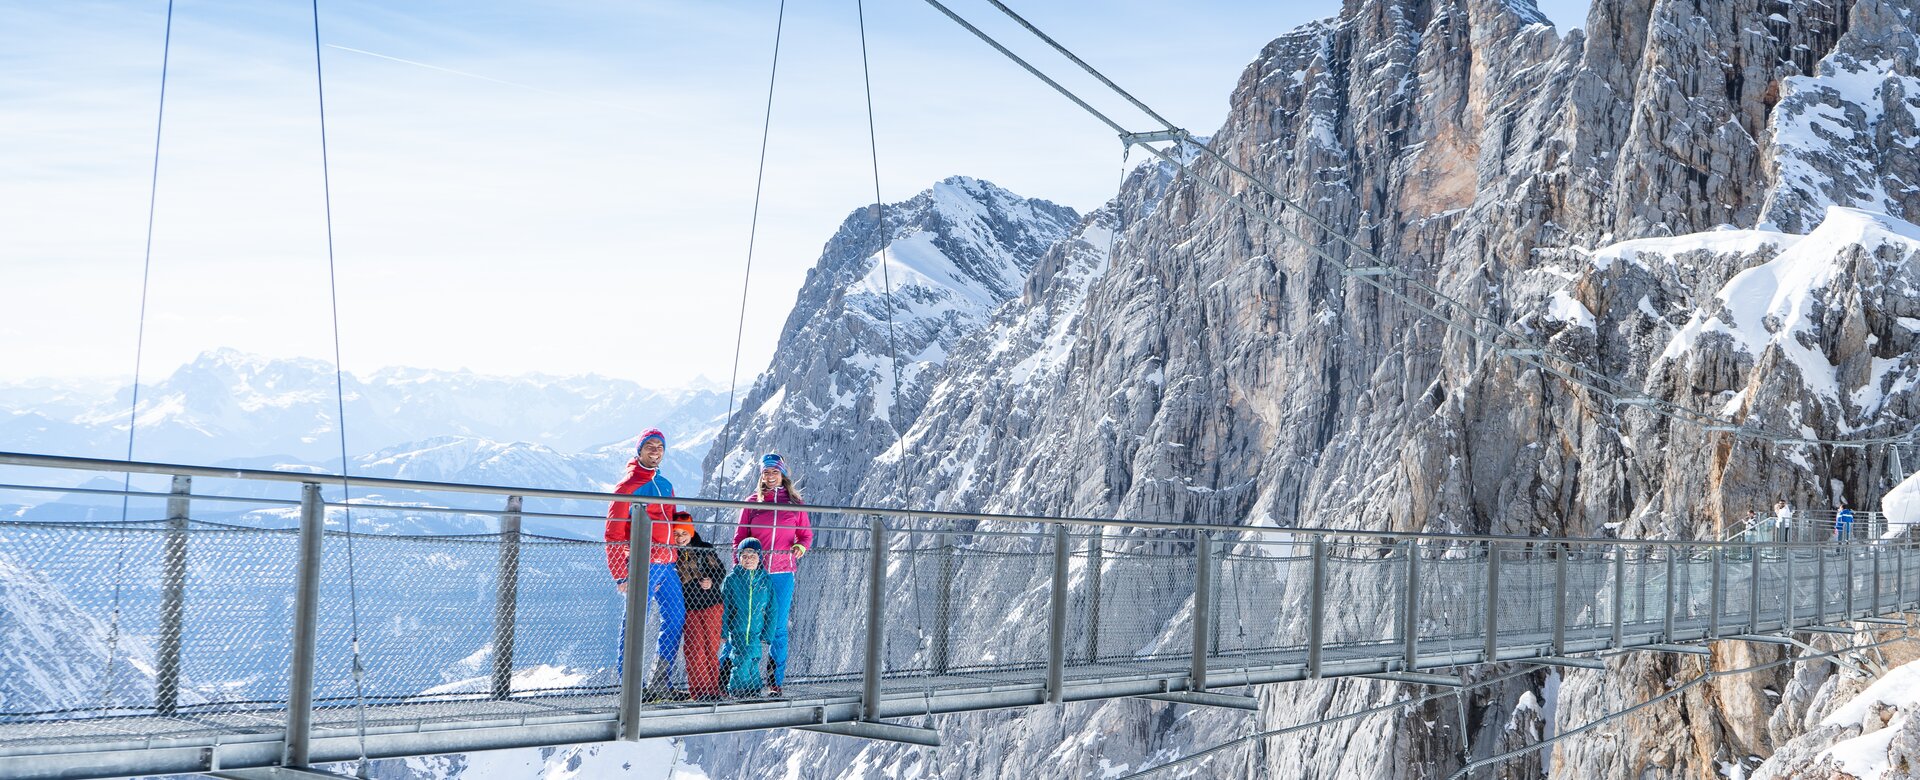 Two adults and two children stand on a suspension bridge and below you can see snow-covered mountains | © Josh Absenger